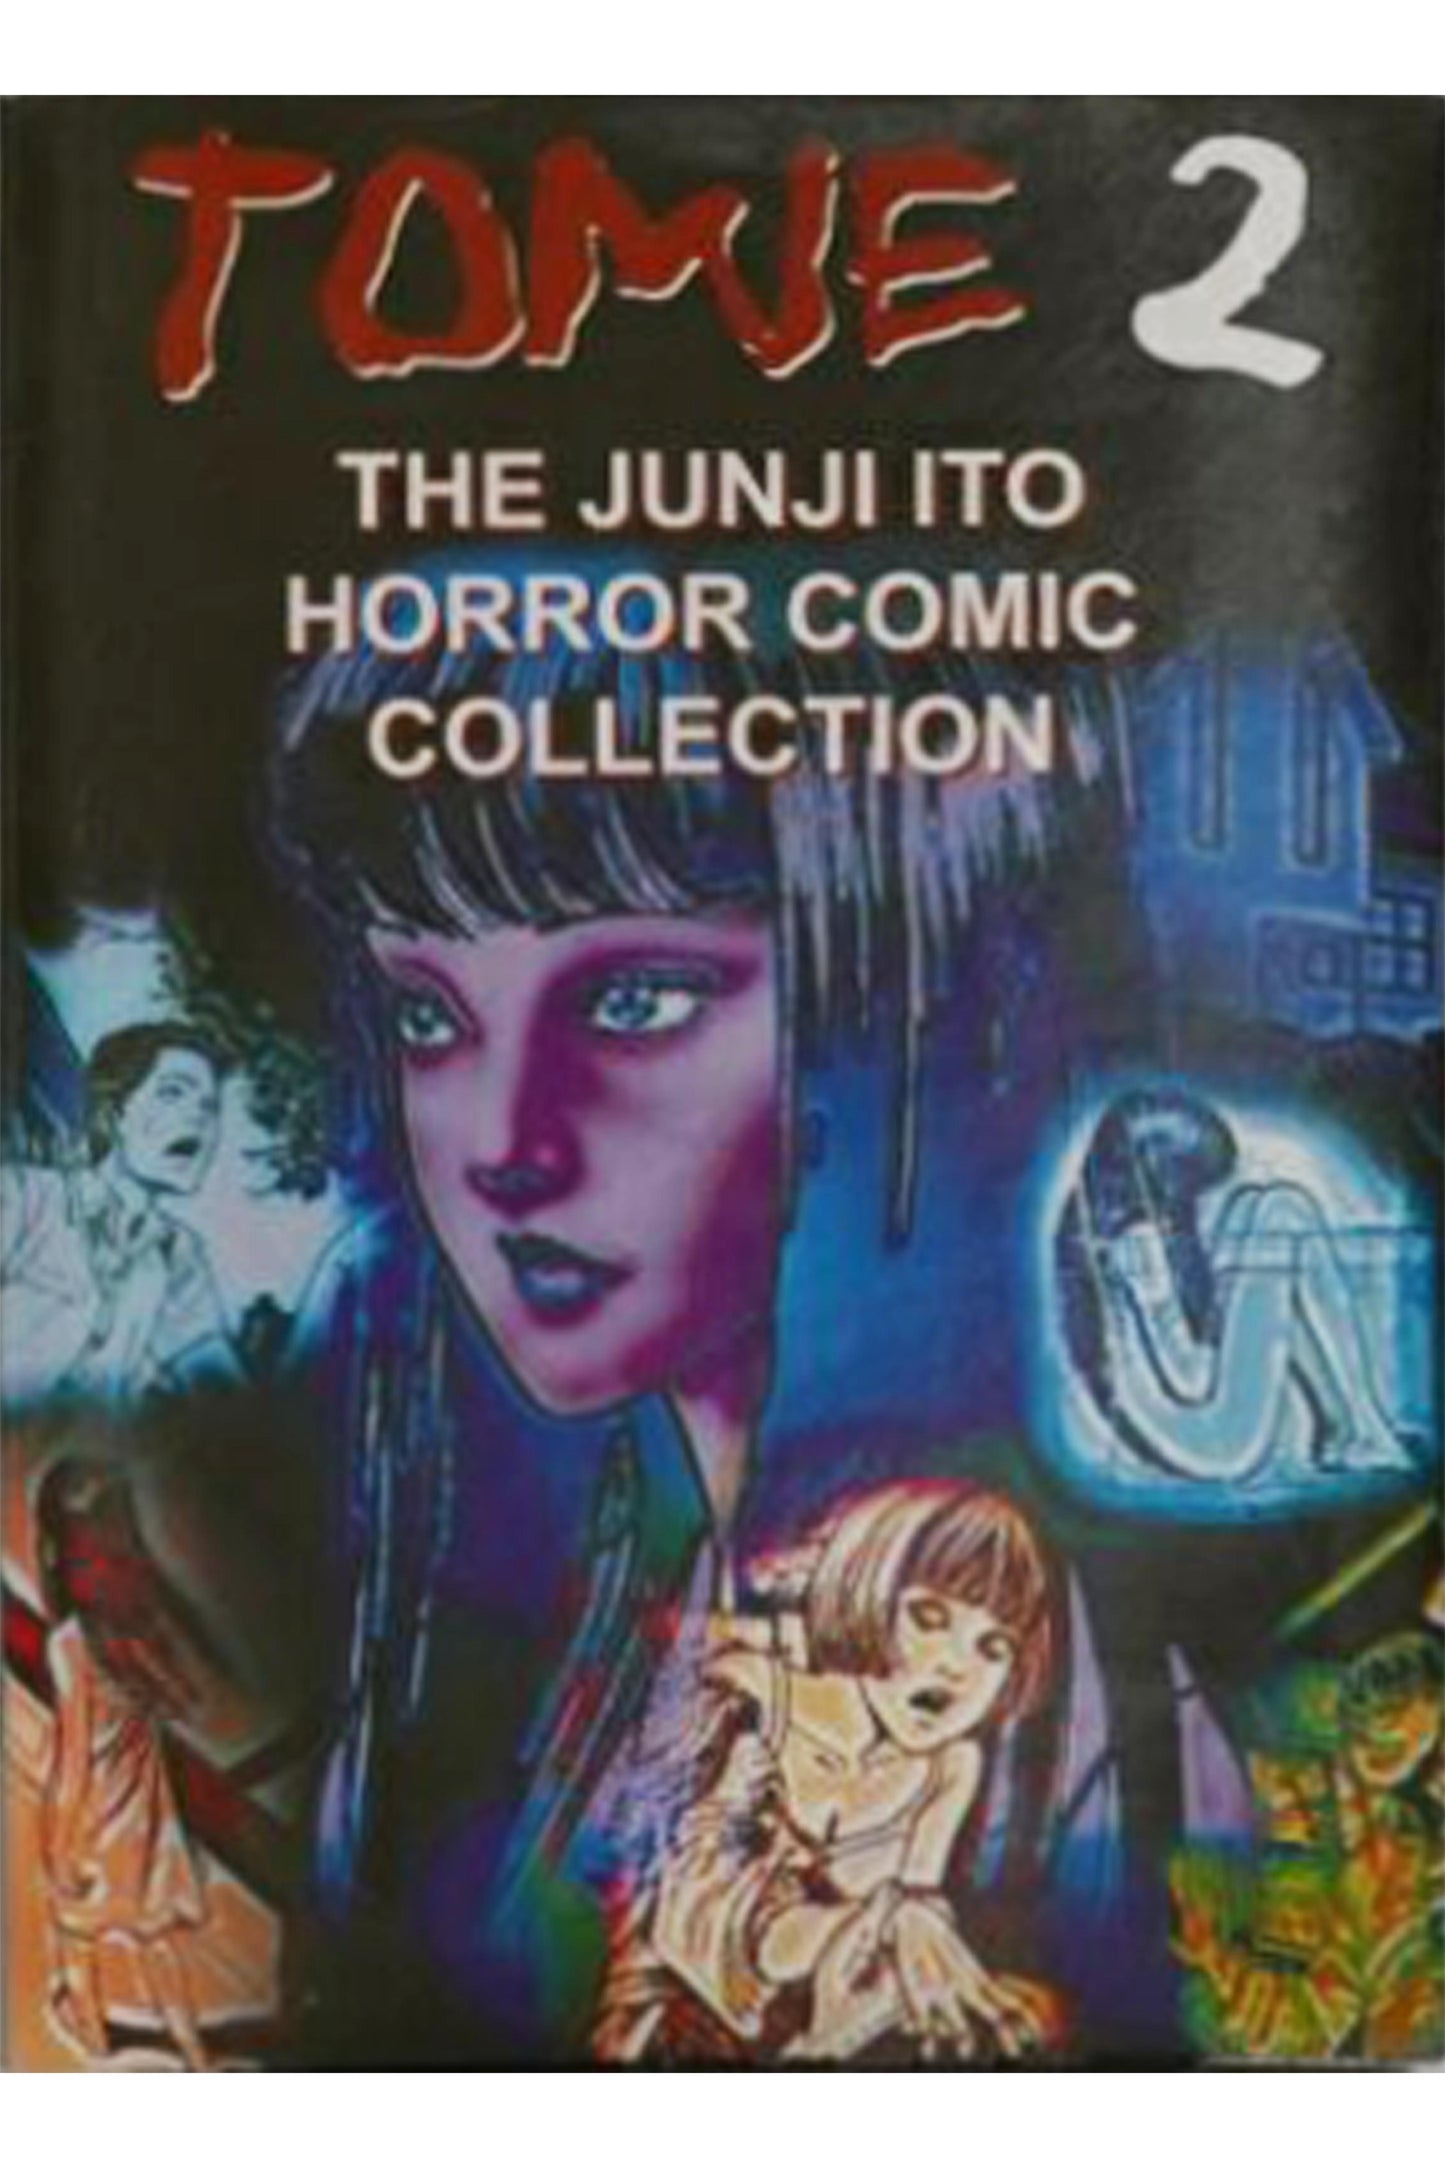 Tomie 2 - The Junji Ito Horror Comic Collection